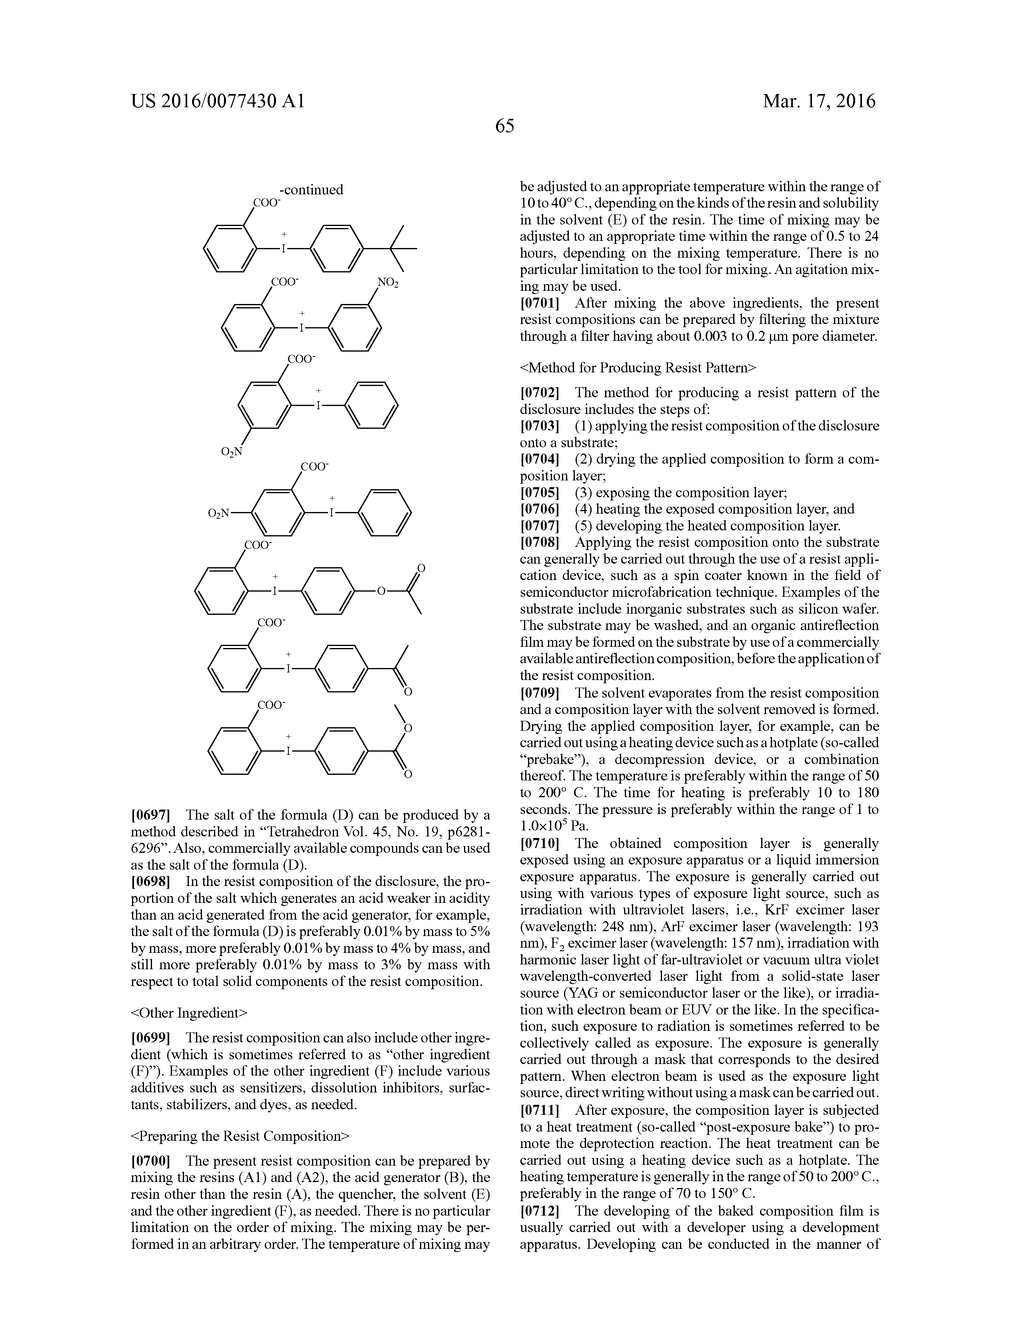 RESIN, RESIST COMPOSITION AND METHOD FOR PRODUCING RESIST PATTERN - diagram, schematic, and image 66